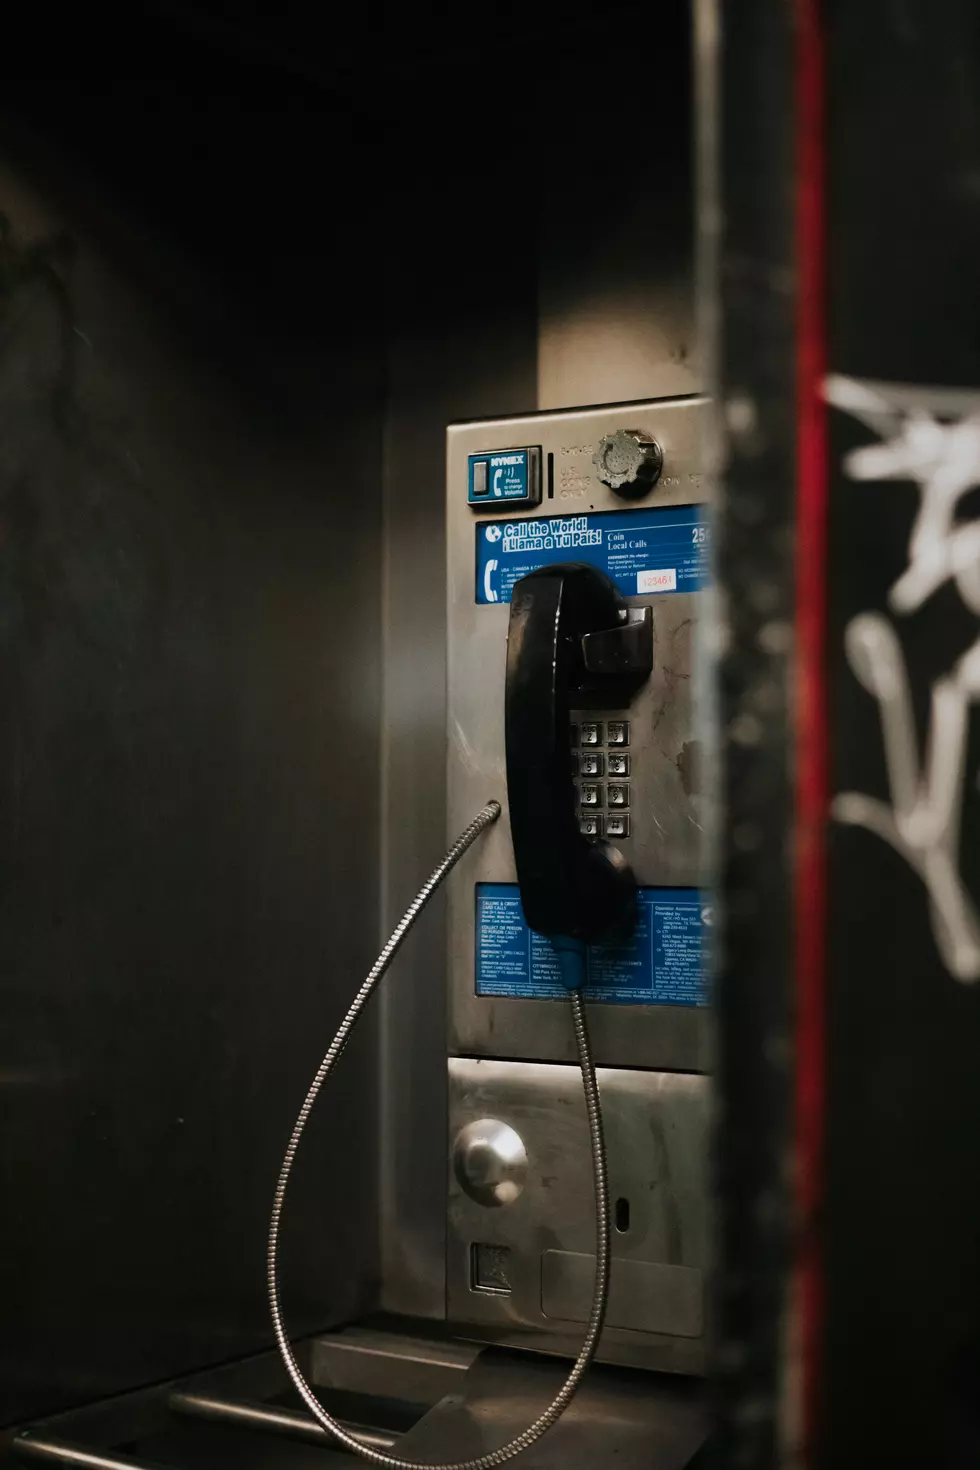 Monumental: NYC Removes Last Public Payphone, What About the Hudson Valley?